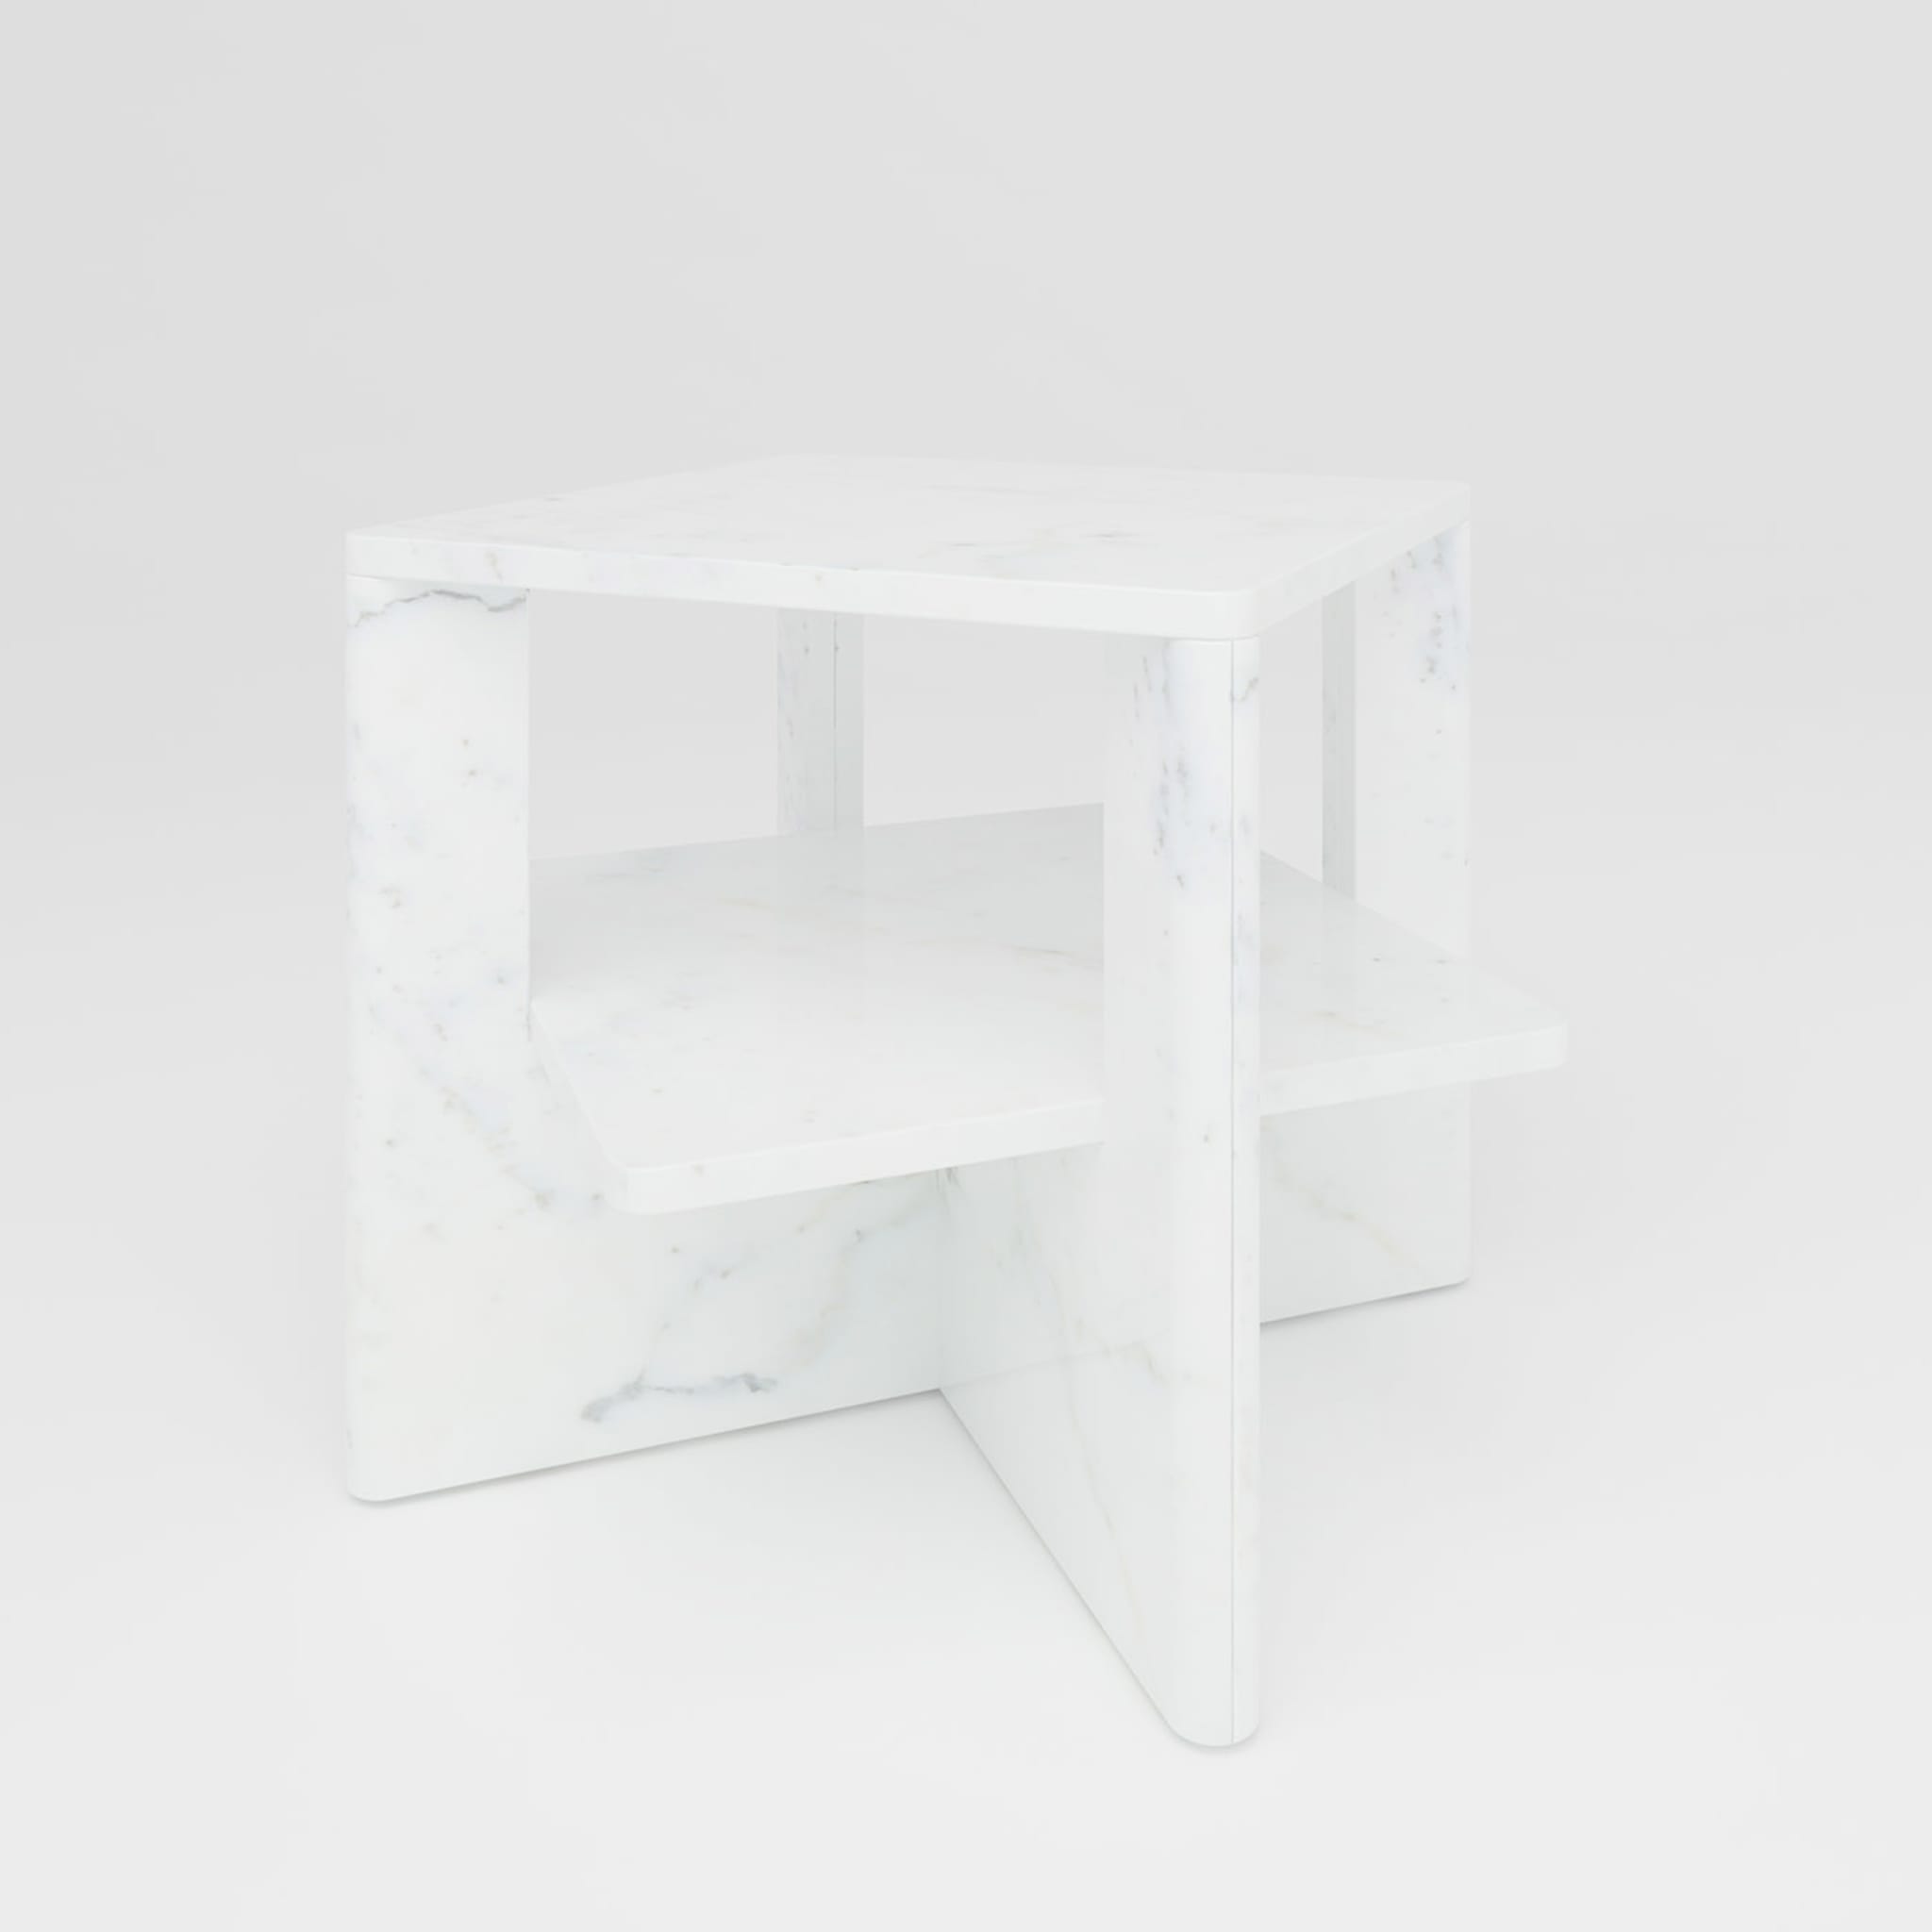 Plus+Double Marble Coffee Table #6 - Alternative view 1